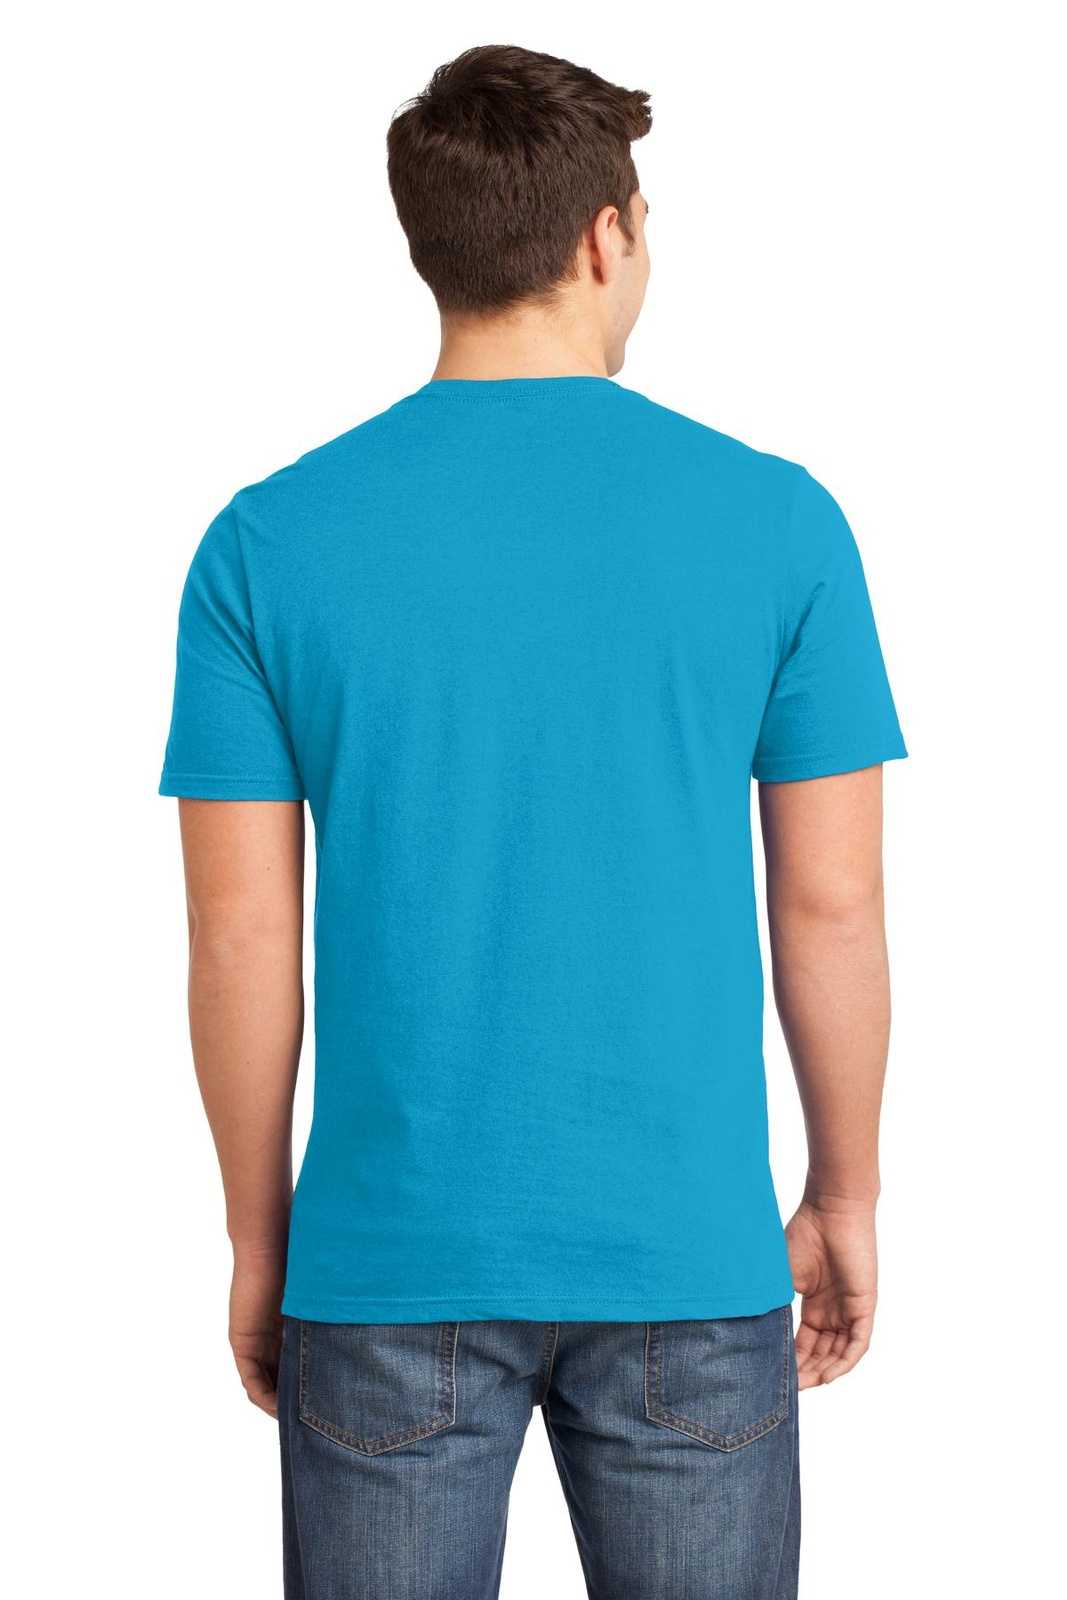 District DT6000 Very Important Tee - Light Turquoise - HIT a Double - 1